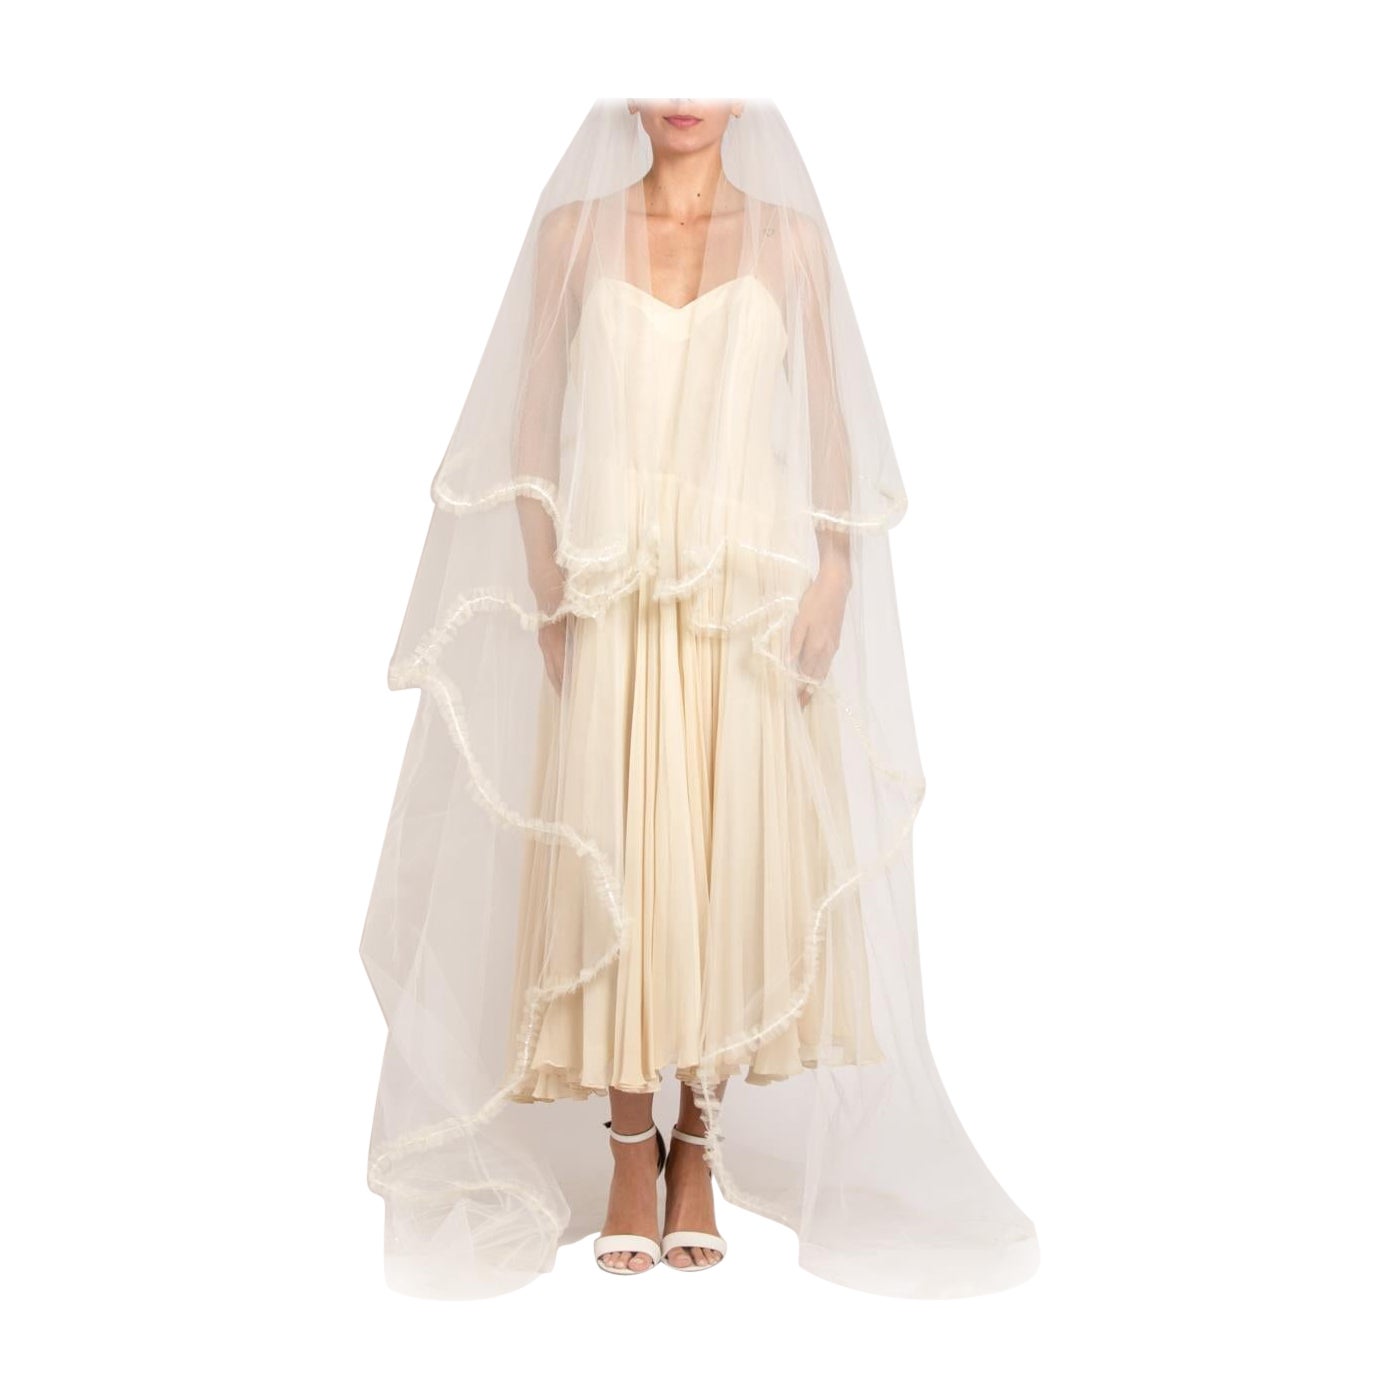 White Tulle With Comb Veil For Sale